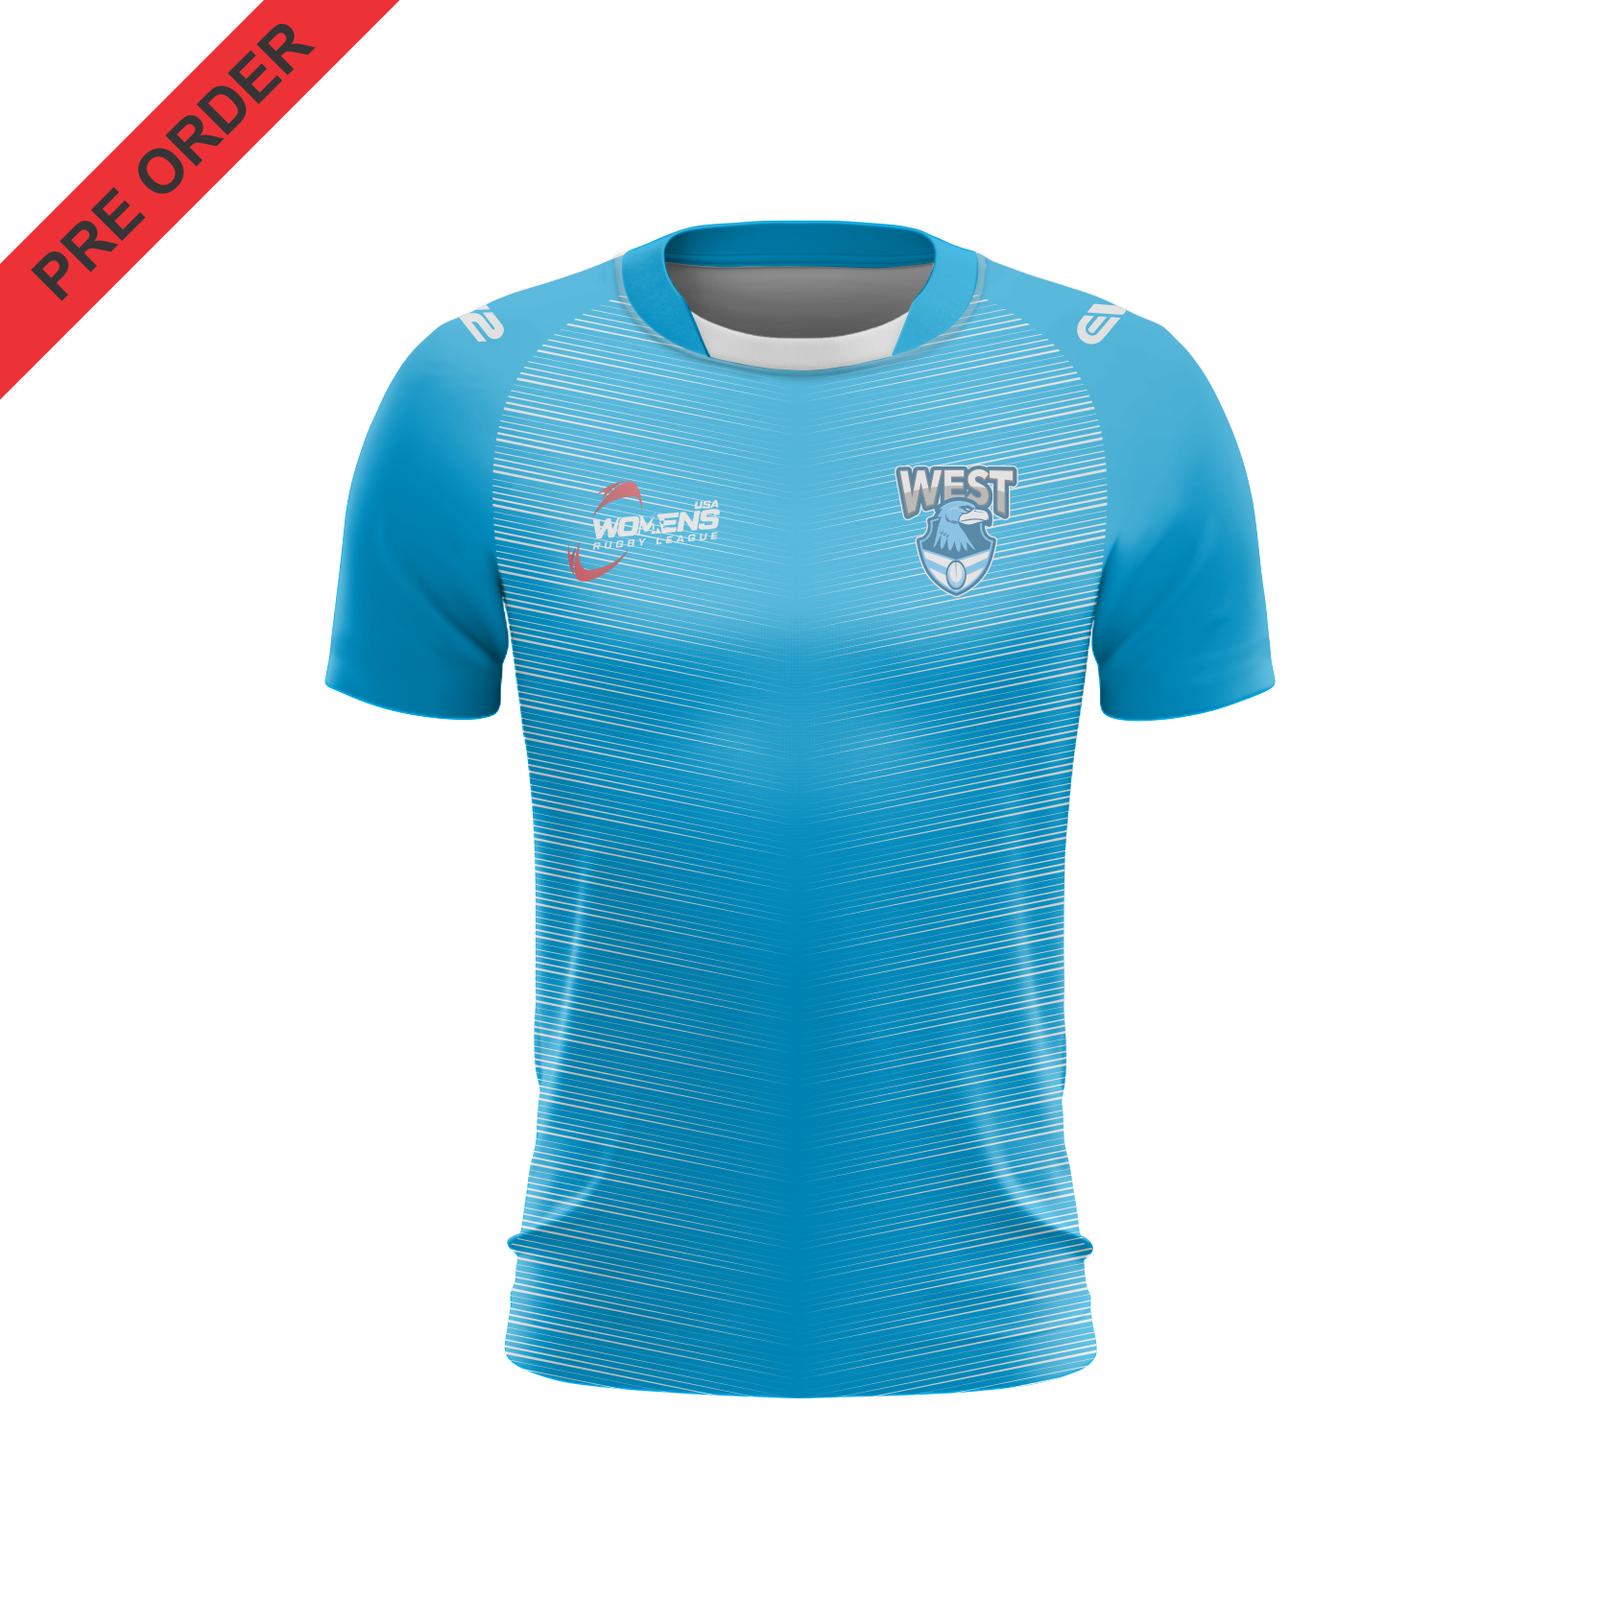 Wests Rugby League - Training Shirt